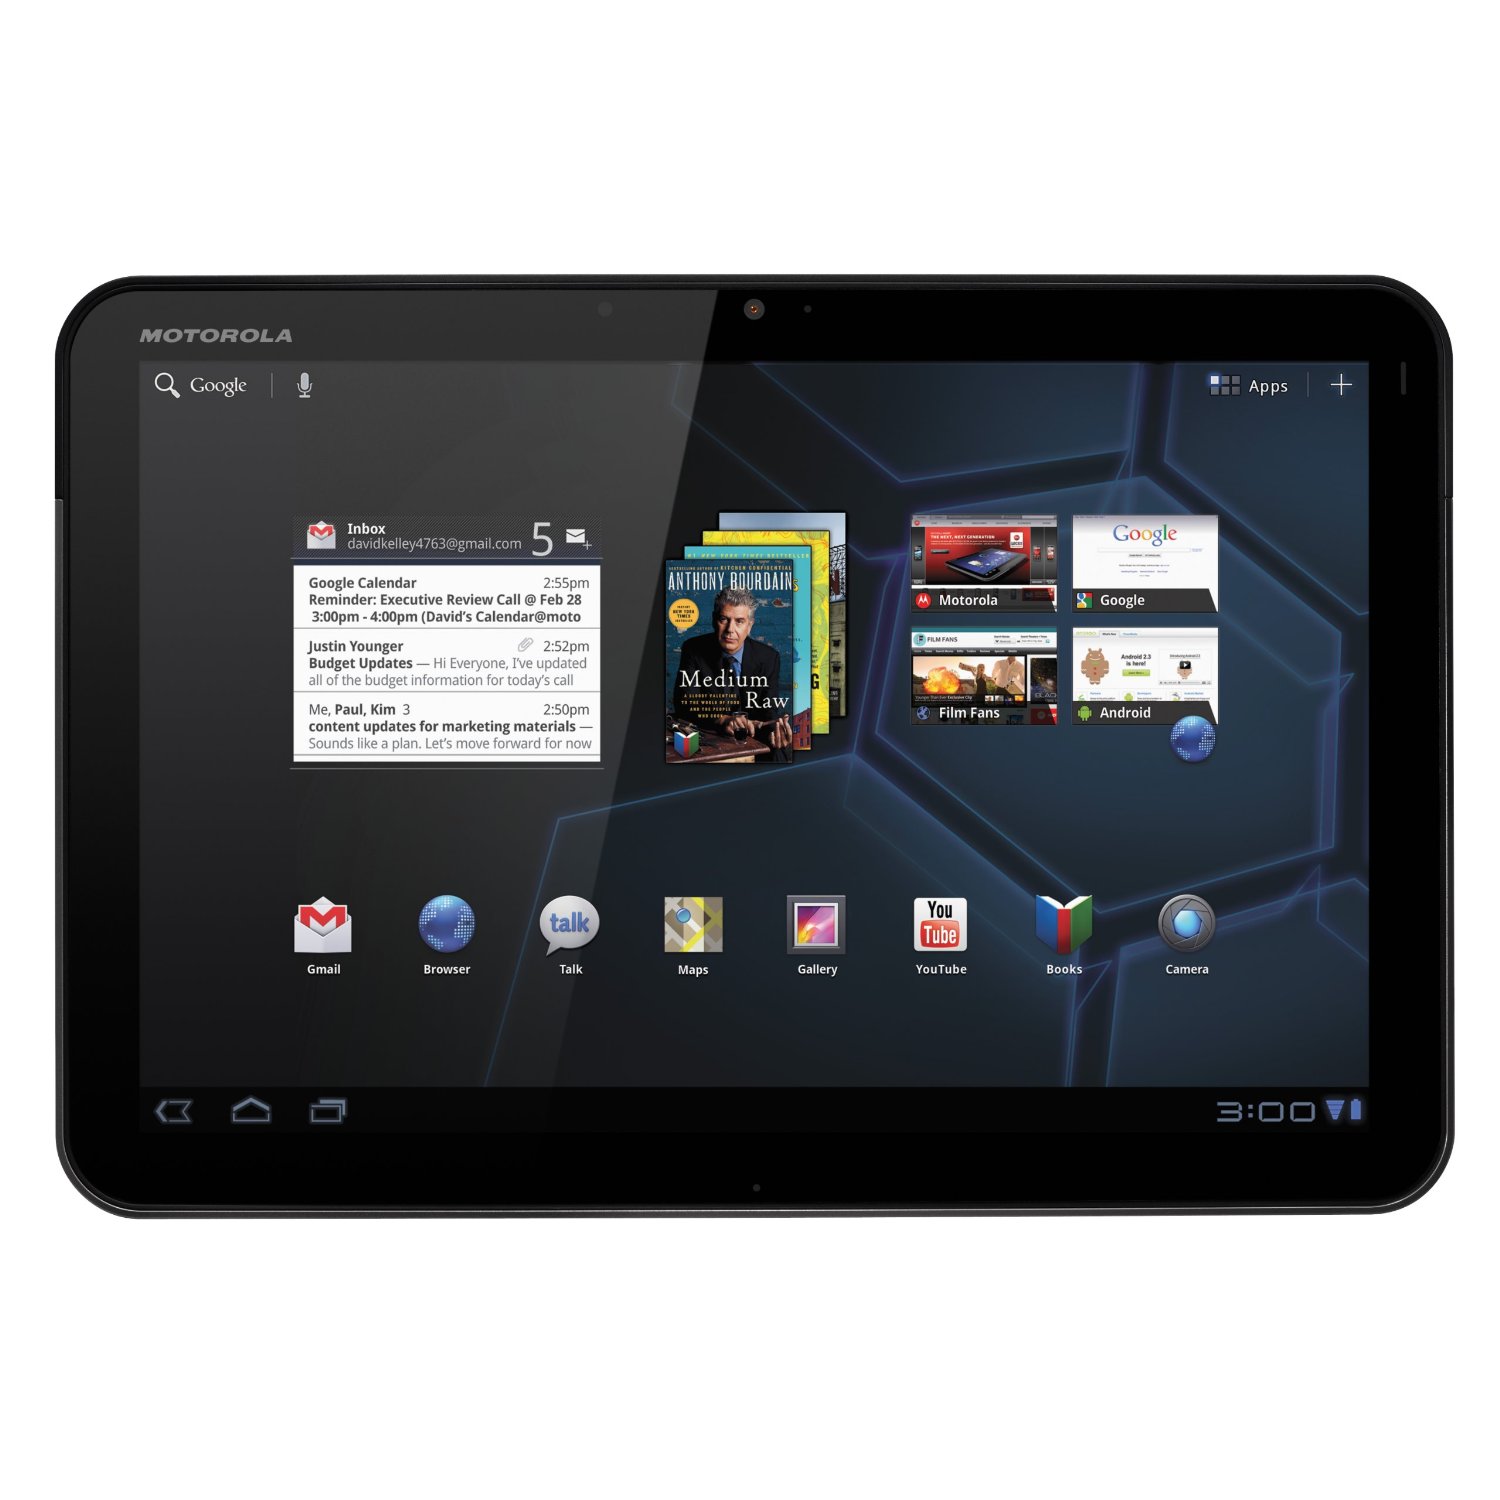 http://thetechjournal.com/wp-content/uploads/images/1109/1316934495-motorola-xoom-32-gb-101inch-with-wifi-android-tablet--3.jpg